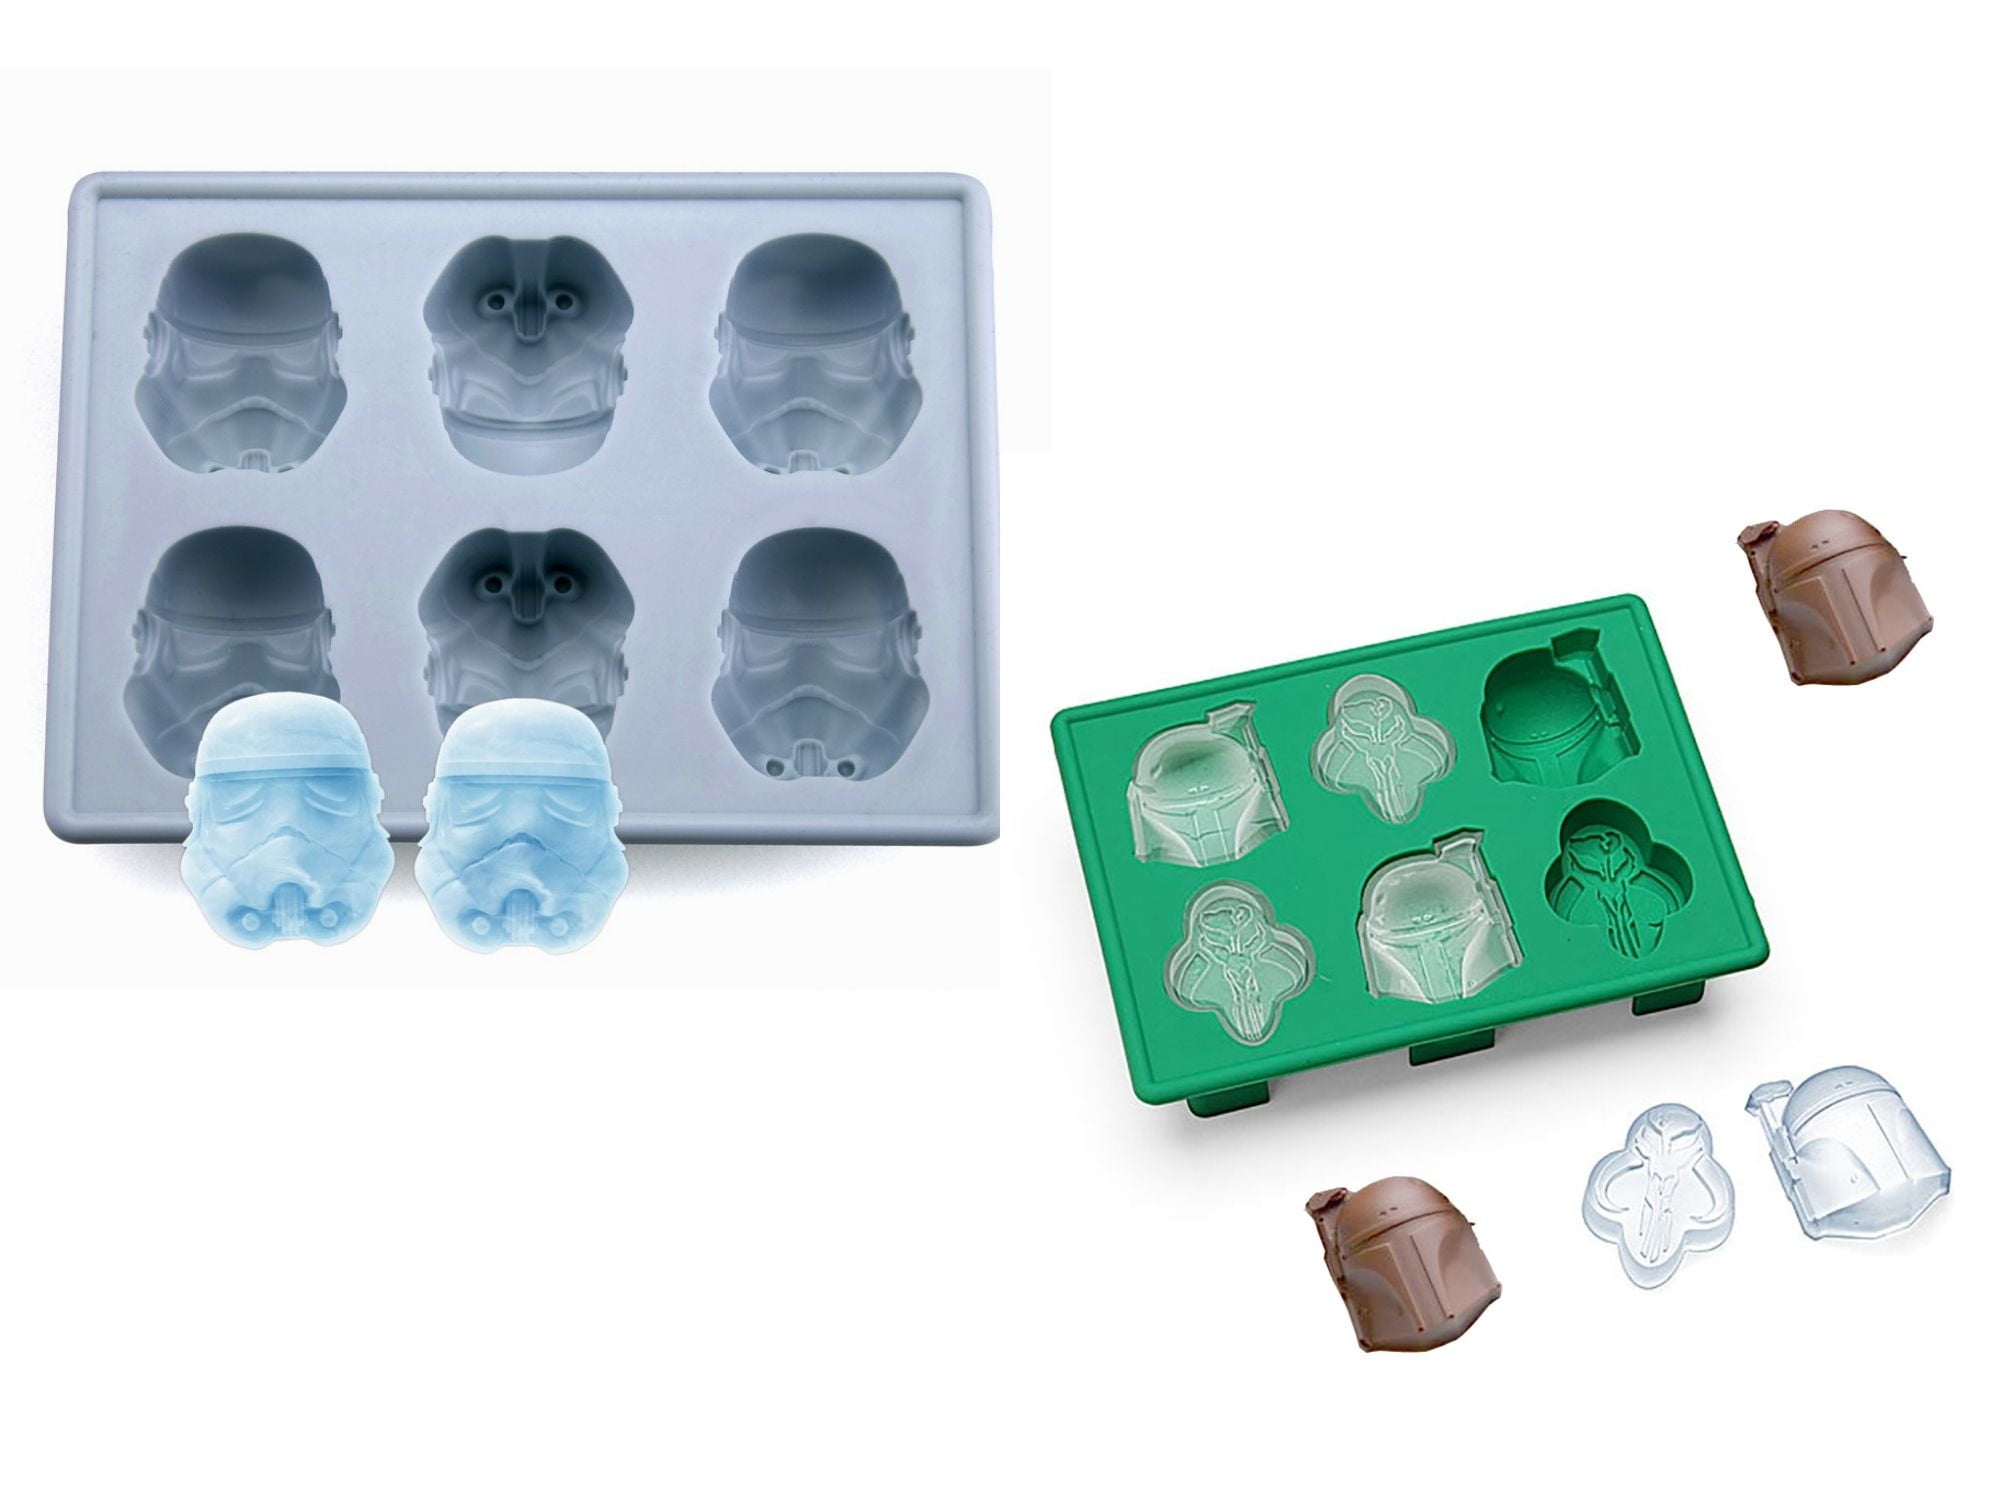 Set of 8 Star Wars Supplier Silicone Chocolate Candy Mold manufacturer-Ice  Cube Tray China Factory